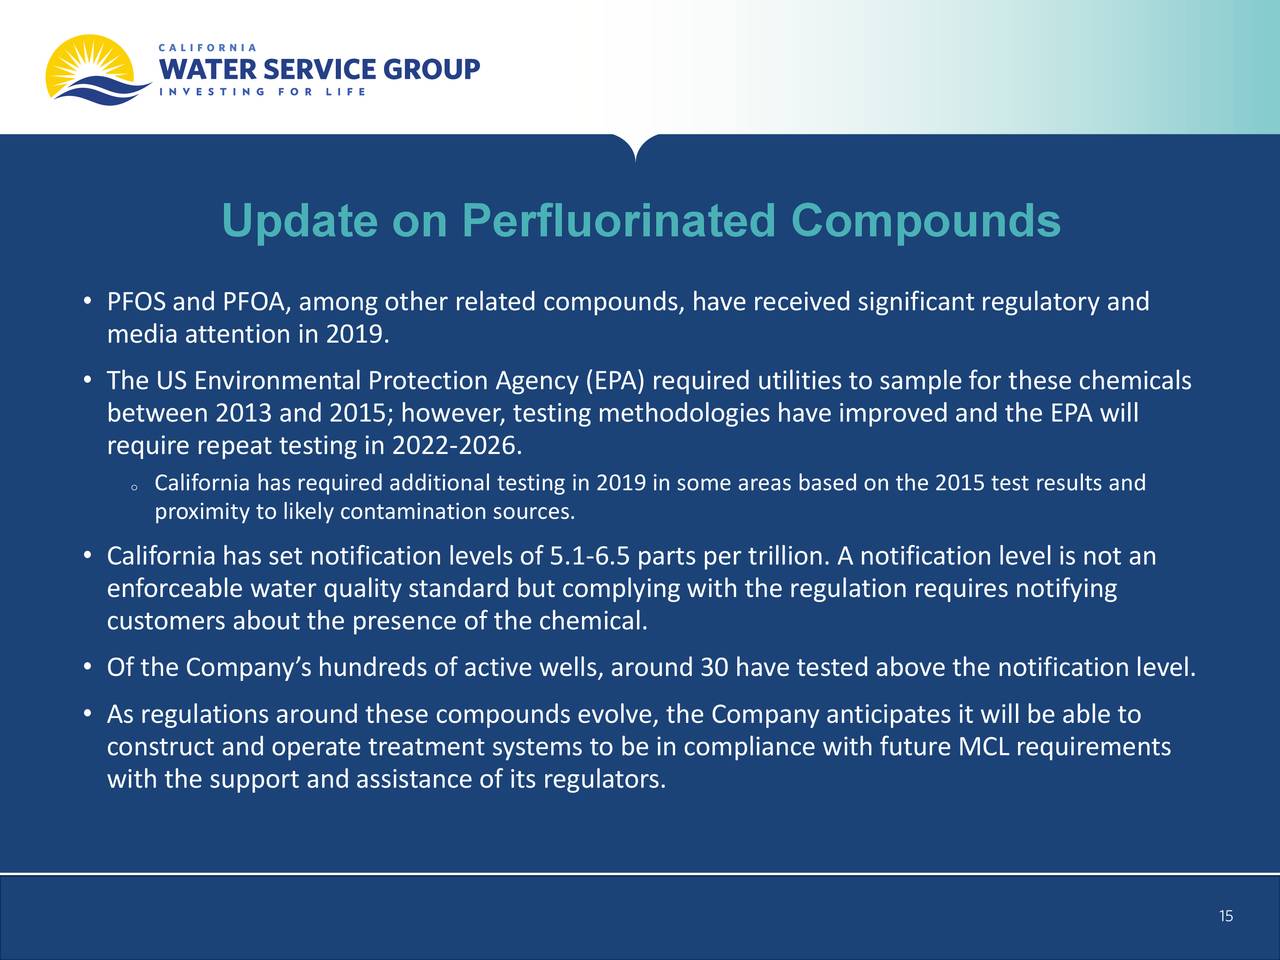 Update on Perfluorinated Compounds